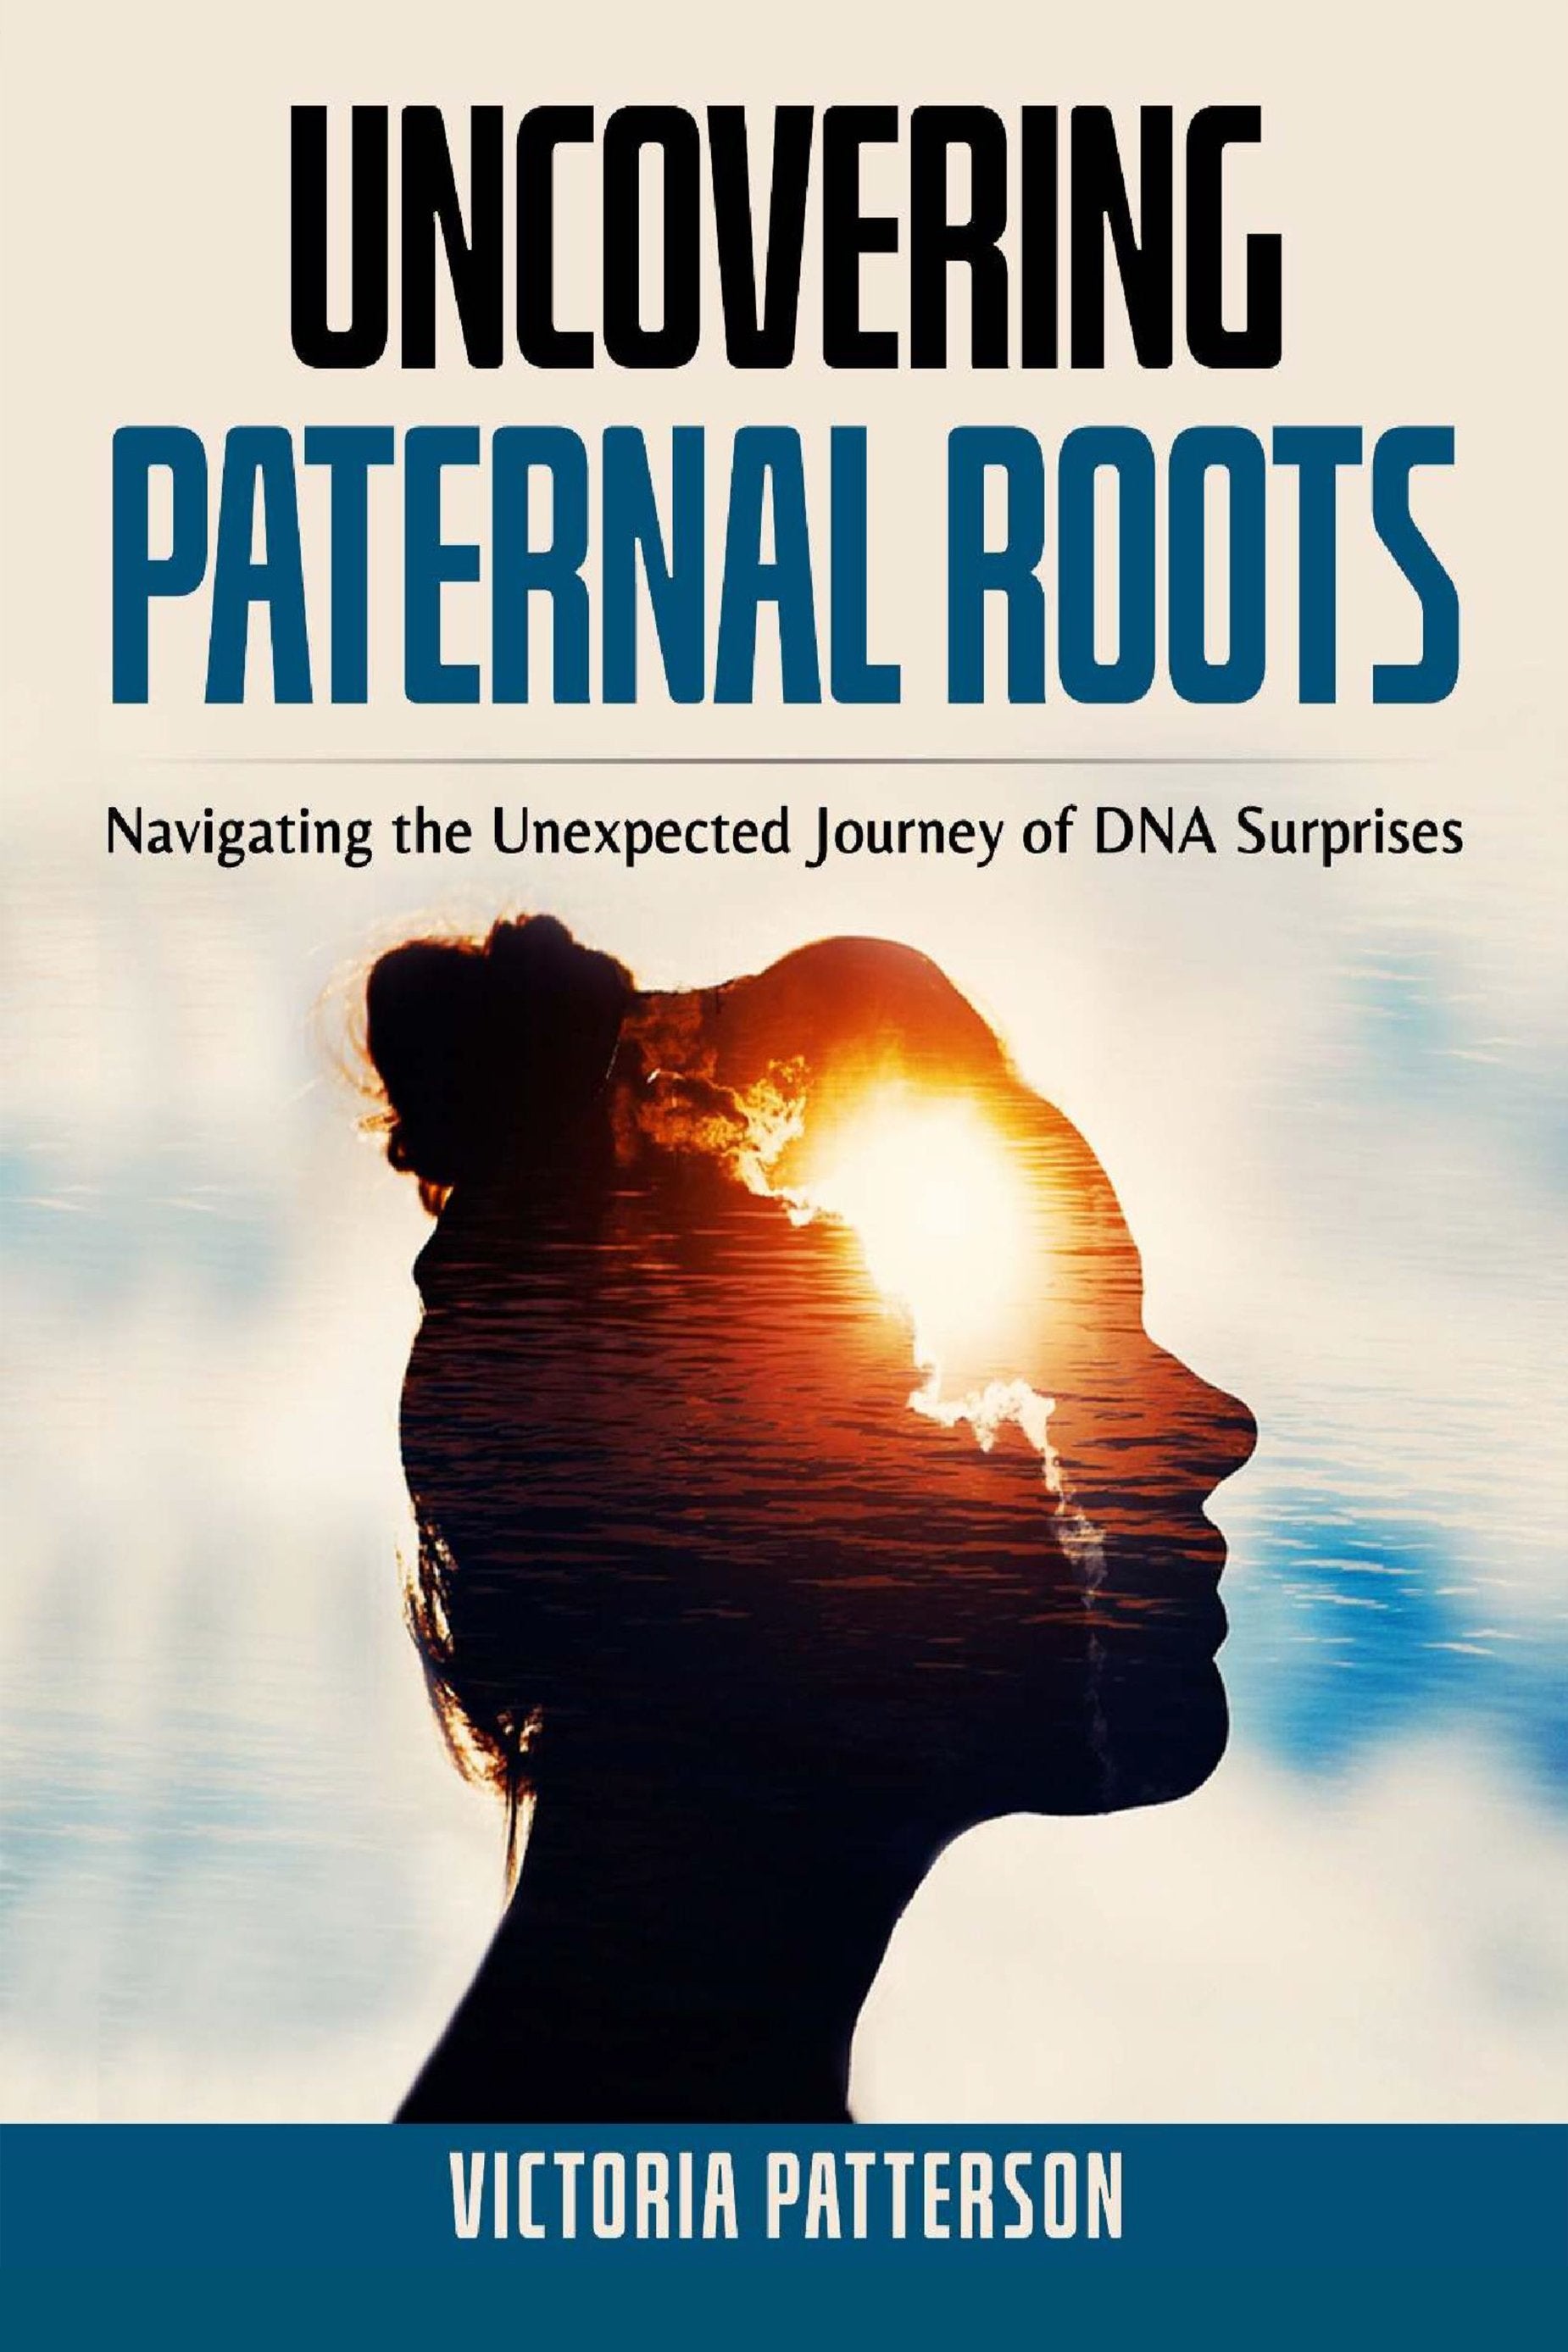 Uncovering Paternal Roots